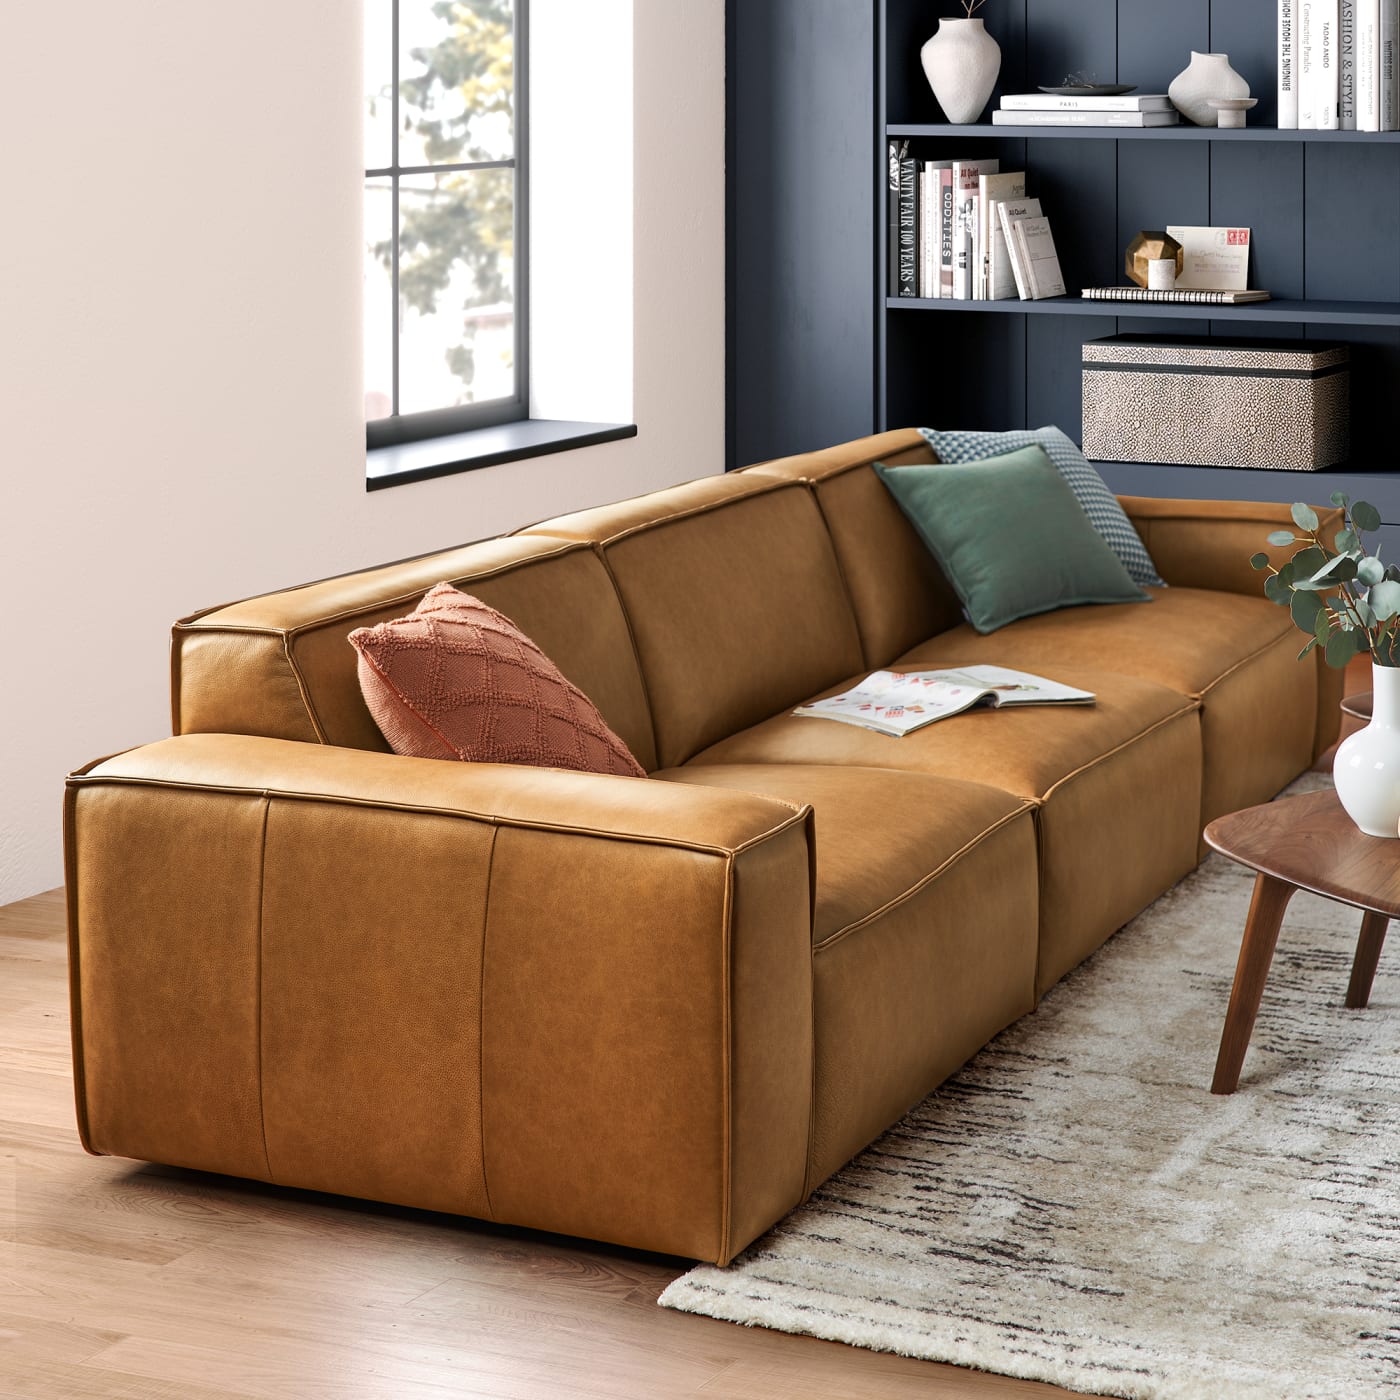 What Is The Best Leather For A Sofa